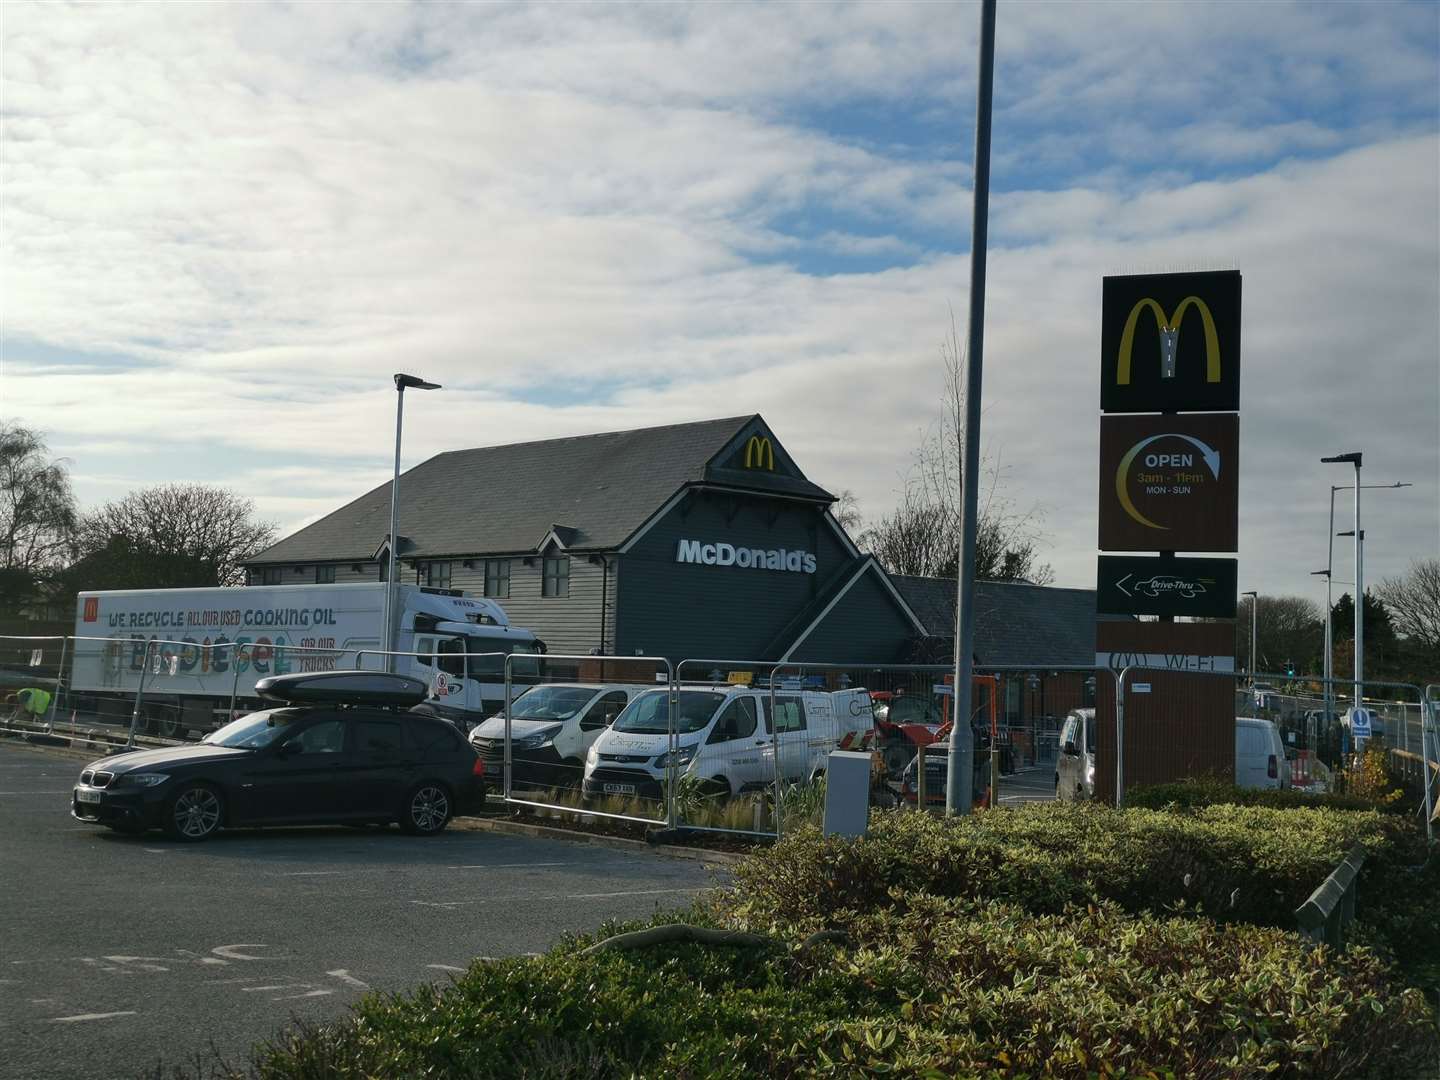 The new McDonald's restaurant and drive-thru in Westwood Road, Broadstairs